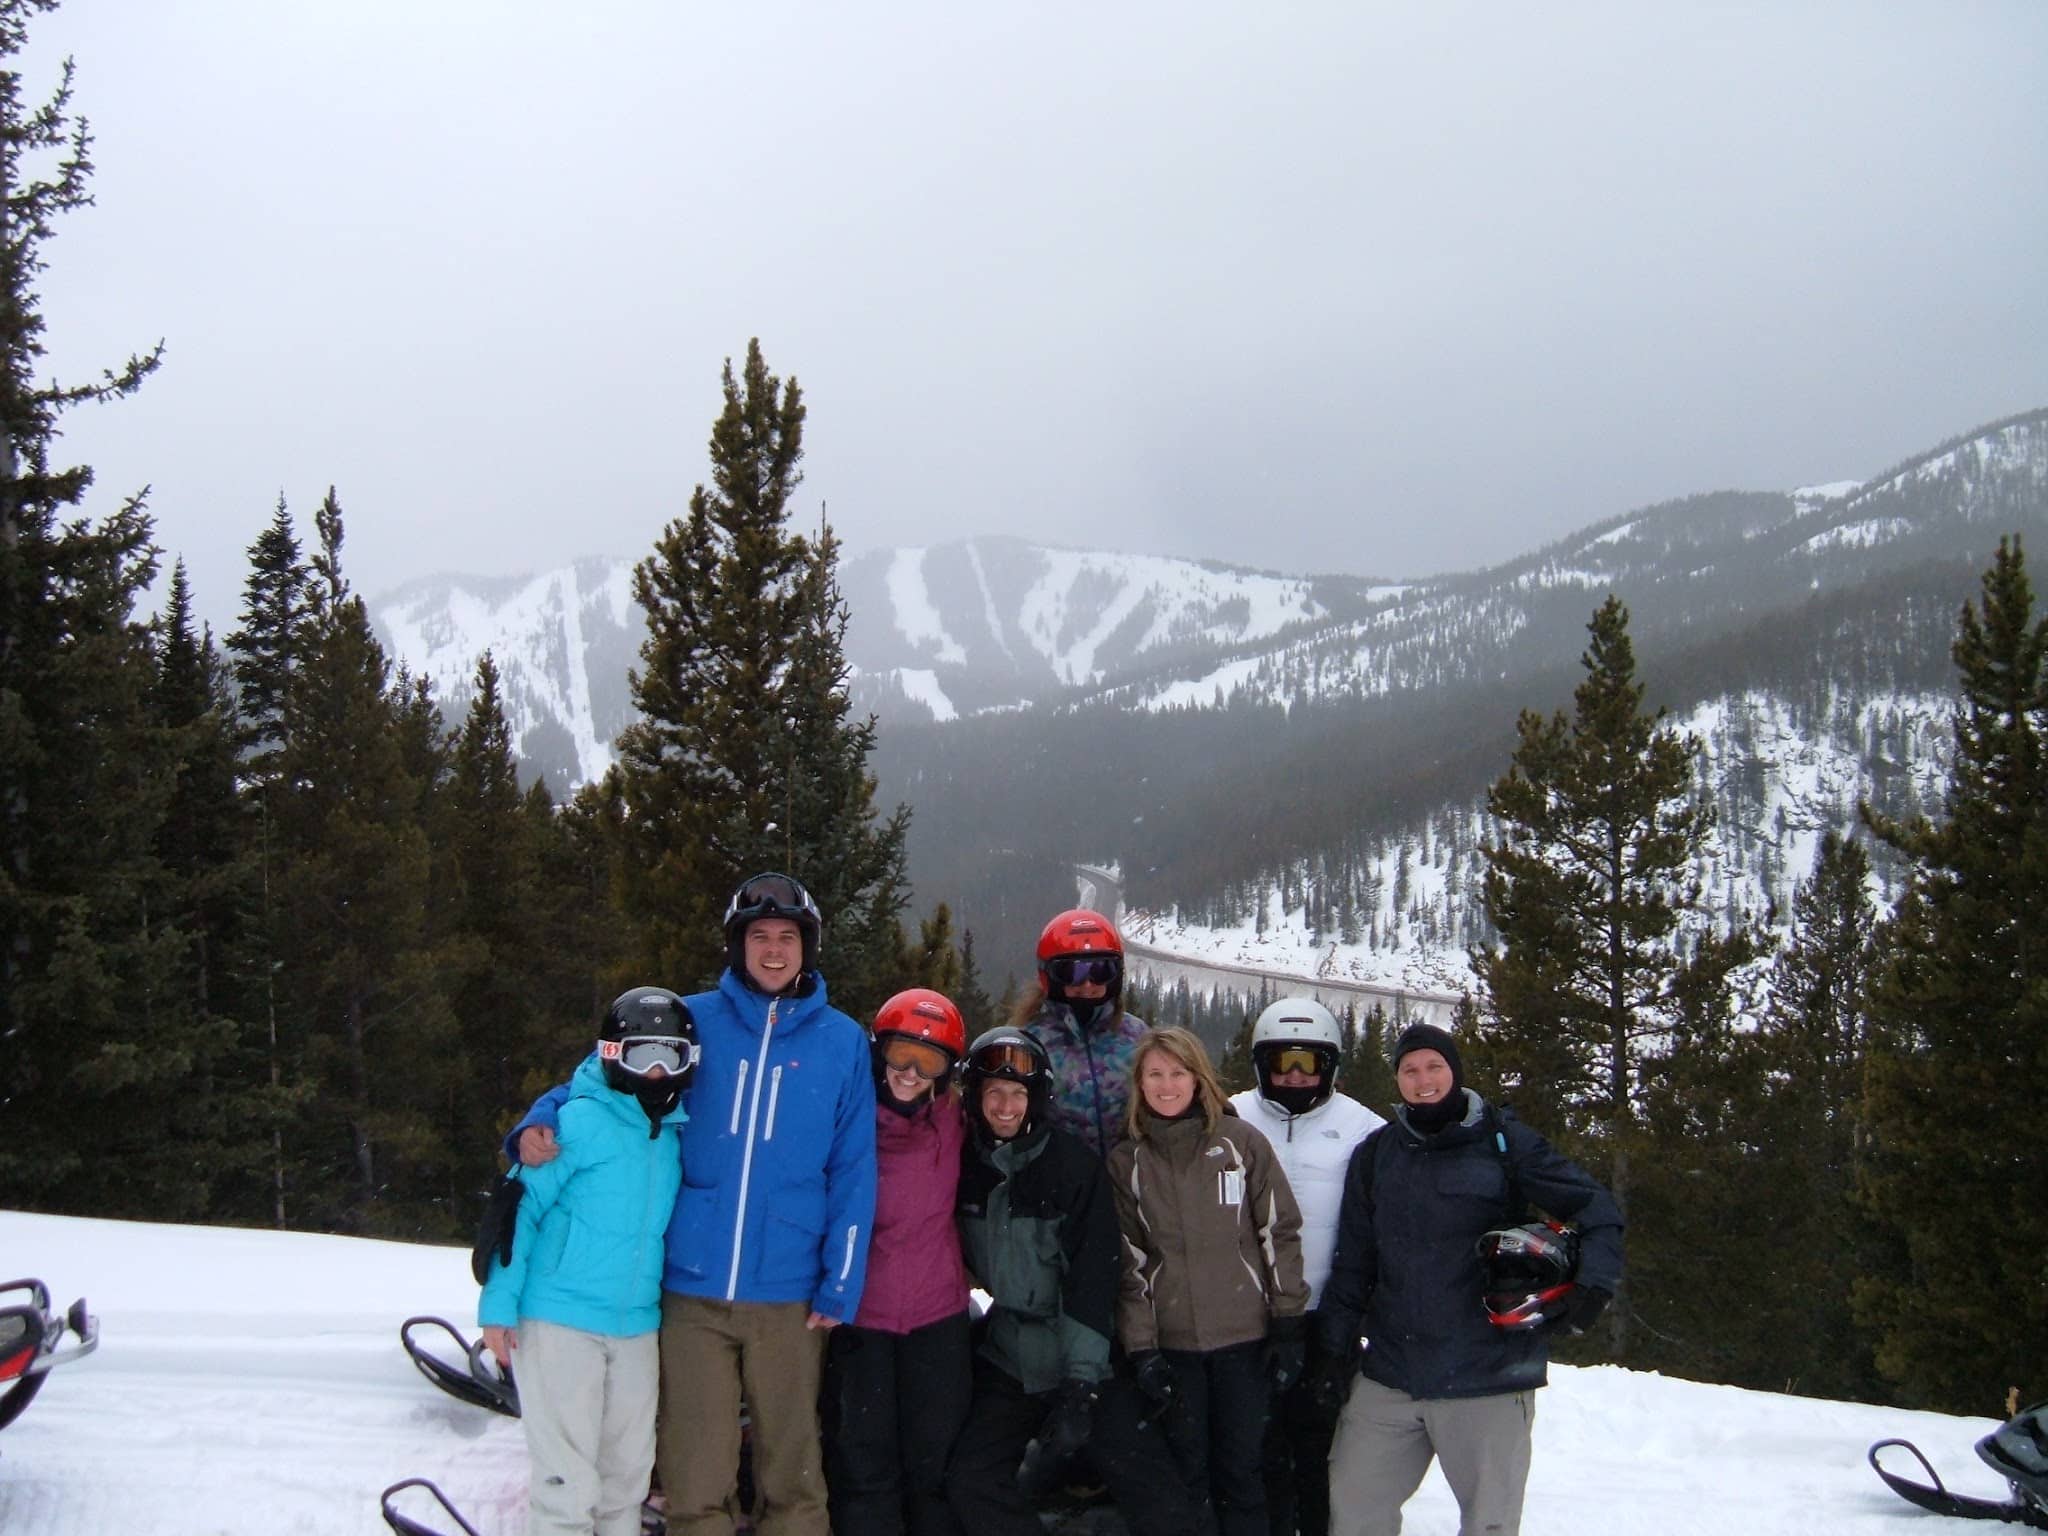 Eight people on a winter snowmobile tour with a ski area in the background.